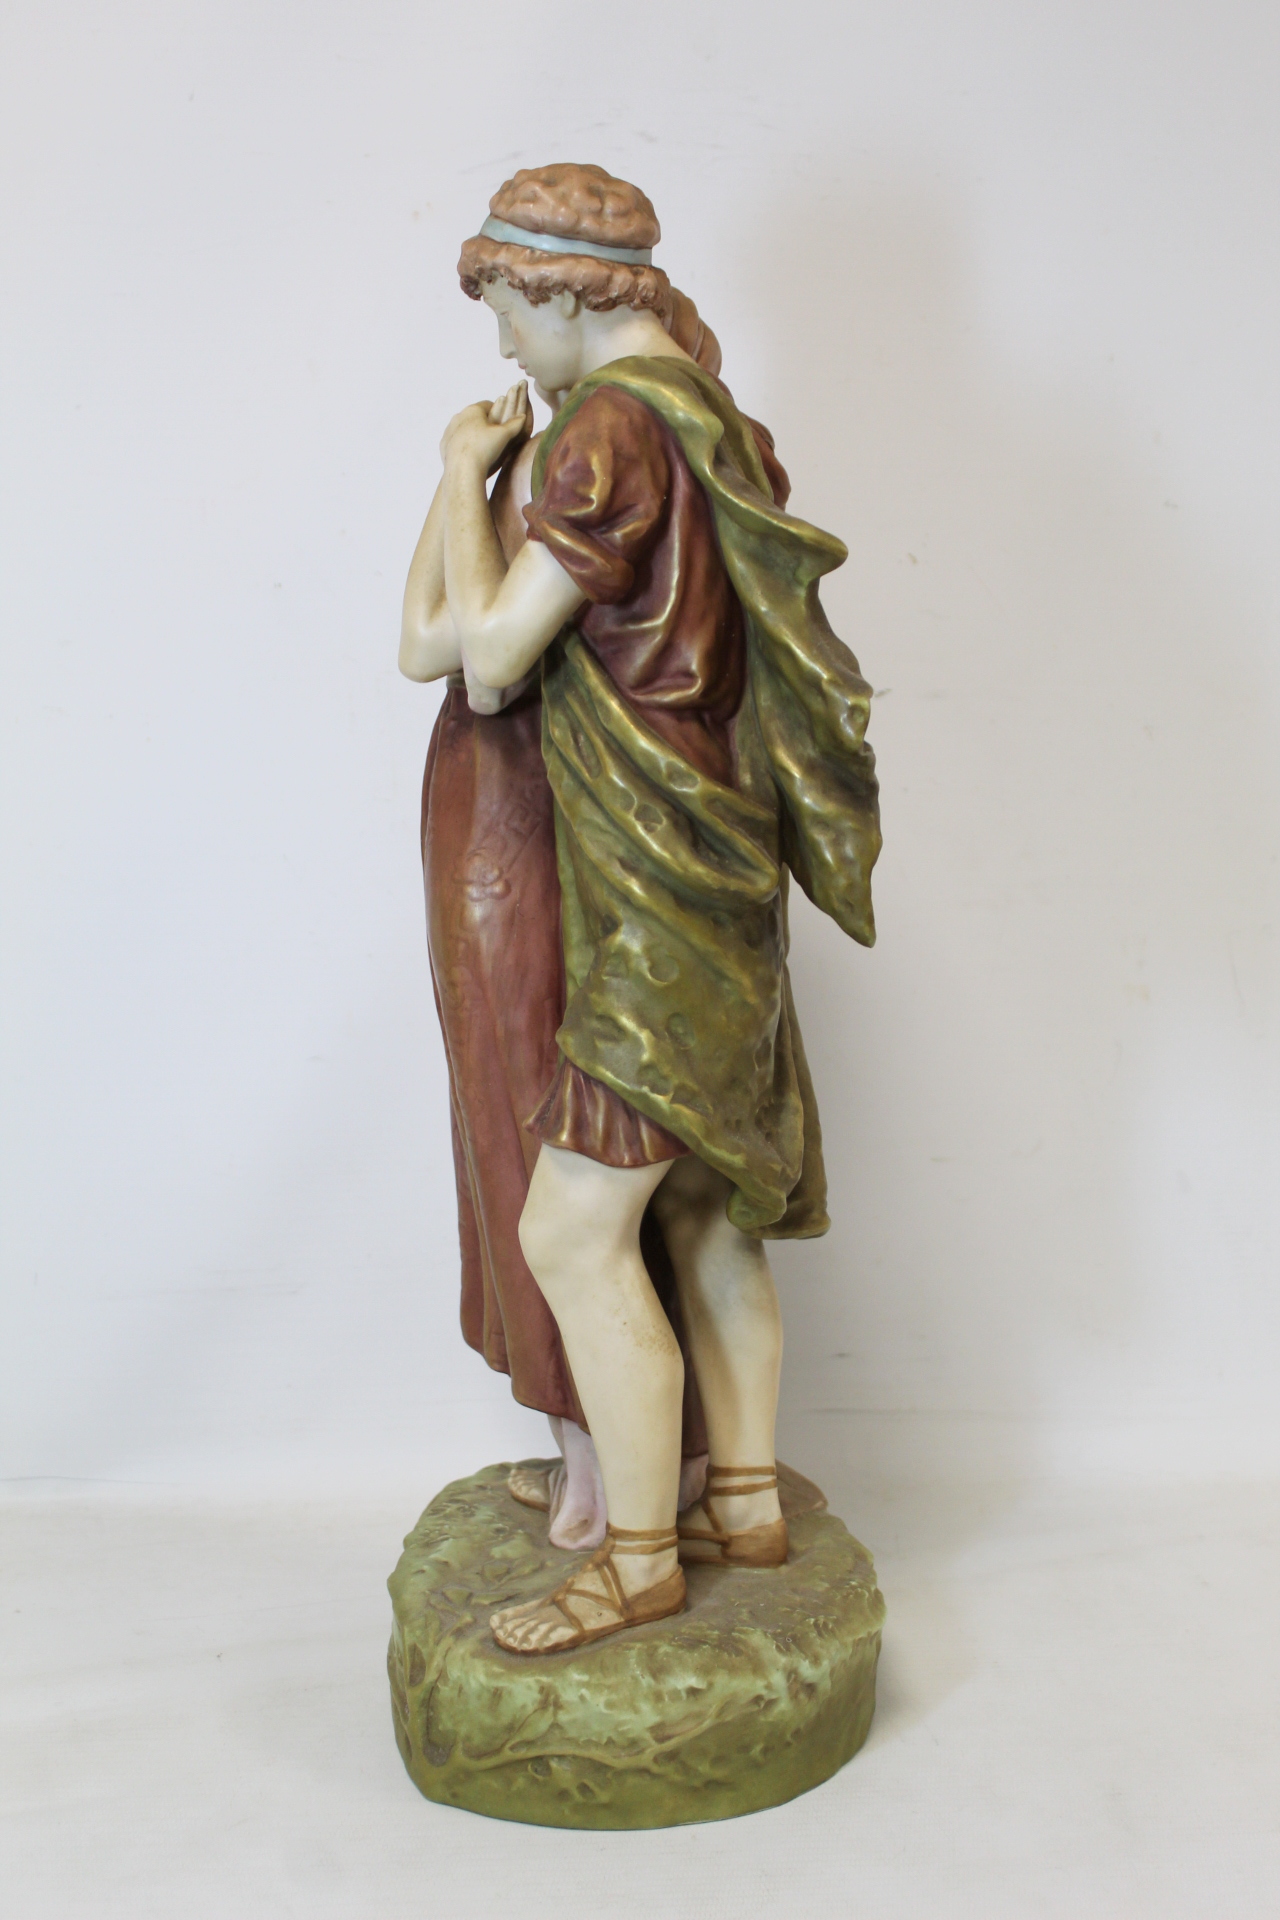 Royal Dux porcelain figure group of two lovers, both in classical dress, by Alois Hampel, - Image 6 of 9